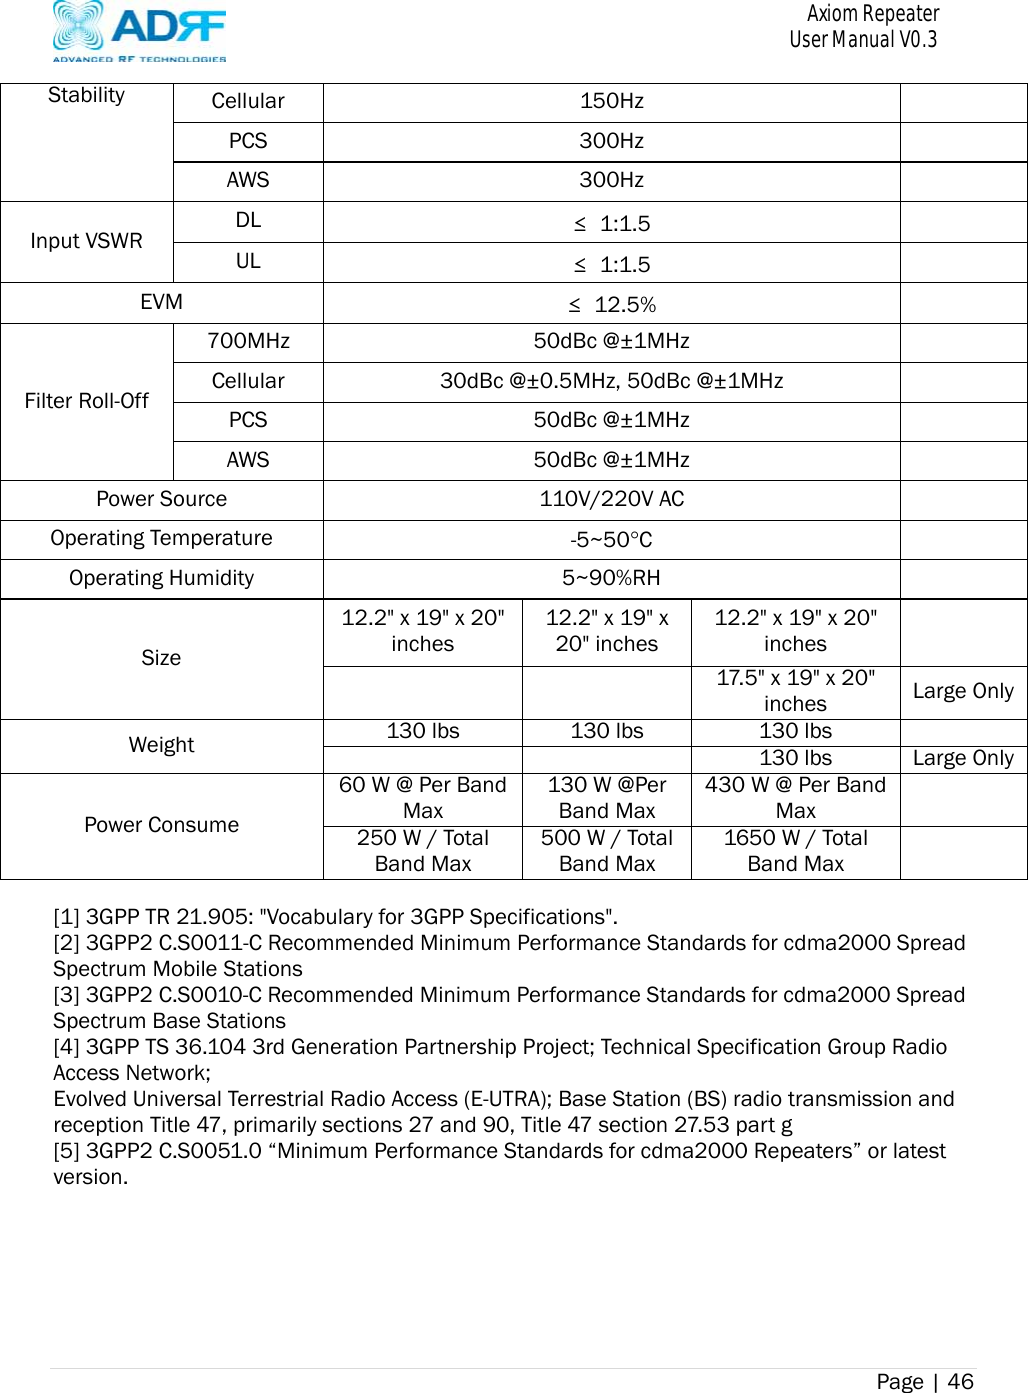       Axiom Repeater     User Manual V0.3 Page | 46    Stability  Cellular 150Hz   PCS 300Hz   AWS 300Hz   Input VSWR  DL  ≤ 1:1.5   UL  ≤ 1:1.5   EVM  ≤ 12.5%   Filter Roll-Off 700MHz 50dBc @±1MHz   Cellular  30dBc @±0.5MHz, 50dBc @±1MHz  PCS 50dBc @±1MHz   AWS 50dBc @±1MHz   Power Source  110V/220V AC   Operating Temperature  -5~50C   Operating Humidity  5~90%RH   Size 12.2&quot; x 19&quot; x 20&quot; inches 12.2&quot; x 19&quot; x 20&quot; inches 12.2&quot; x 19&quot; x 20&quot; inches     17.5&quot; x 19&quot; x 20&quot; inches  Large OnlyWeight  130 lbs 130 lbs 130 lbs 130 lbs  Large OnlyPower Consume 60 W @ Per Band Max 130 W @Per Band Max 430 W @ Per Band Max   250 W / Total Band Max 500 W / TotalBand Max 1650 W / Total Band Max    [1] 3GPP TR 21.905: &quot;Vocabulary for 3GPP Specifications&quot;. [2] 3GPP2 C.S0011-C Recommended Minimum Performance Standards for cdma2000 Spread Spectrum Mobile Stations [3] 3GPP2 C.S0010-C Recommended Minimum Performance Standards for cdma2000 Spread Spectrum Base Stations [4] 3GPP TS 36.104 3rd Generation Partnership Project; Technical Specification Group Radio Access Network; Evolved Universal Terrestrial Radio Access (E-UTRA); Base Station (BS) radio transmission and reception Title 47, primarily sections 27 and 90, Title 47 section 27.53 part g [5] 3GPP2 C.S0051.0 “Minimum Performance Standards for cdma2000 Repeaters” or latest version.     